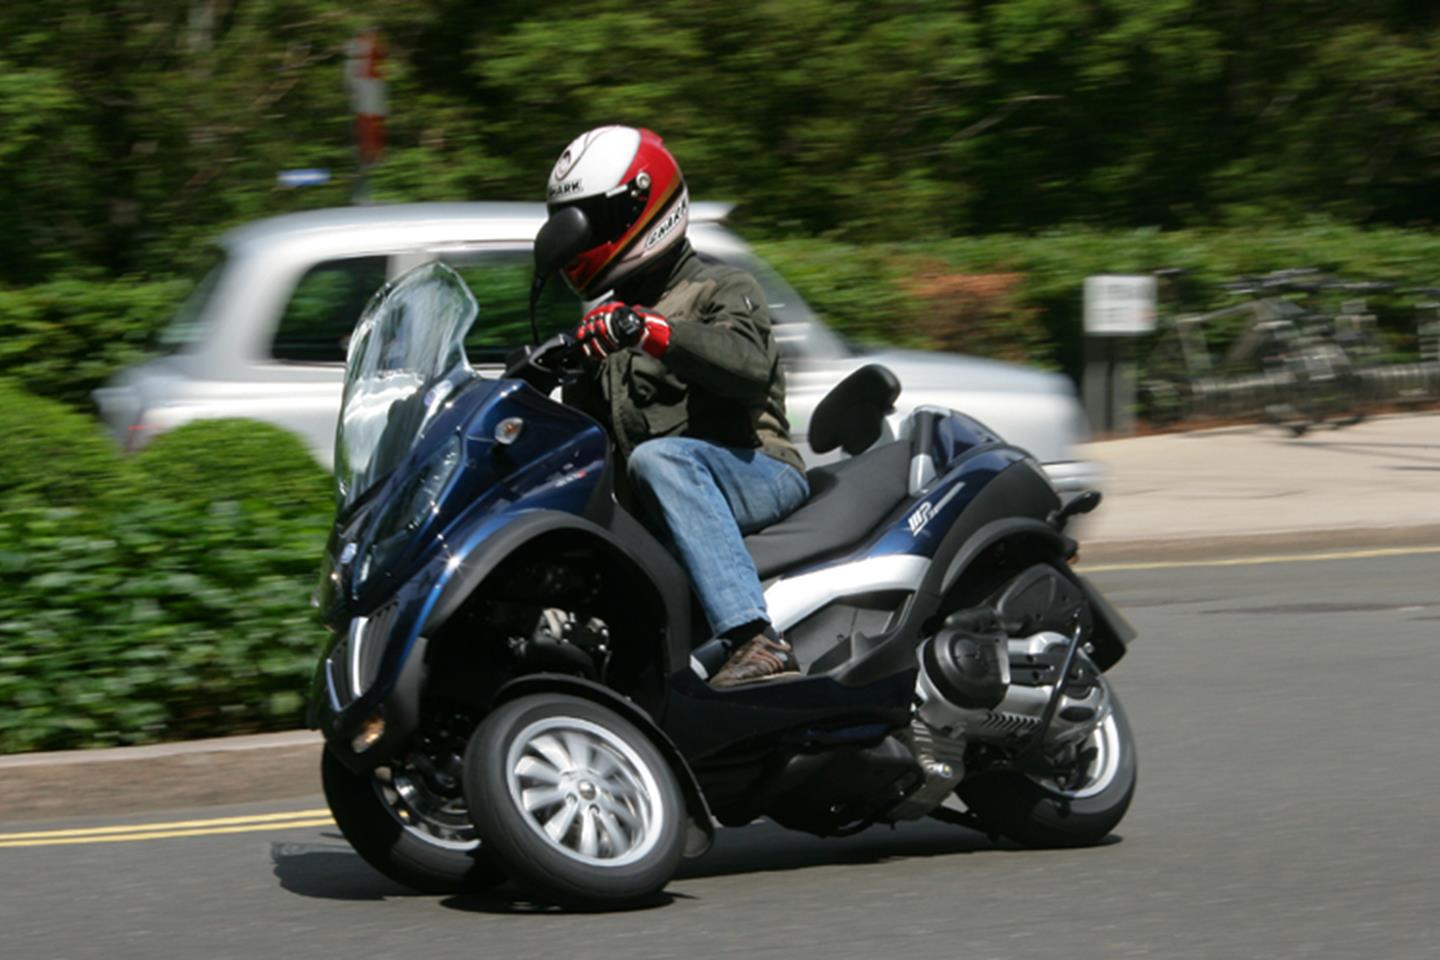 scooter with 2 front wheels